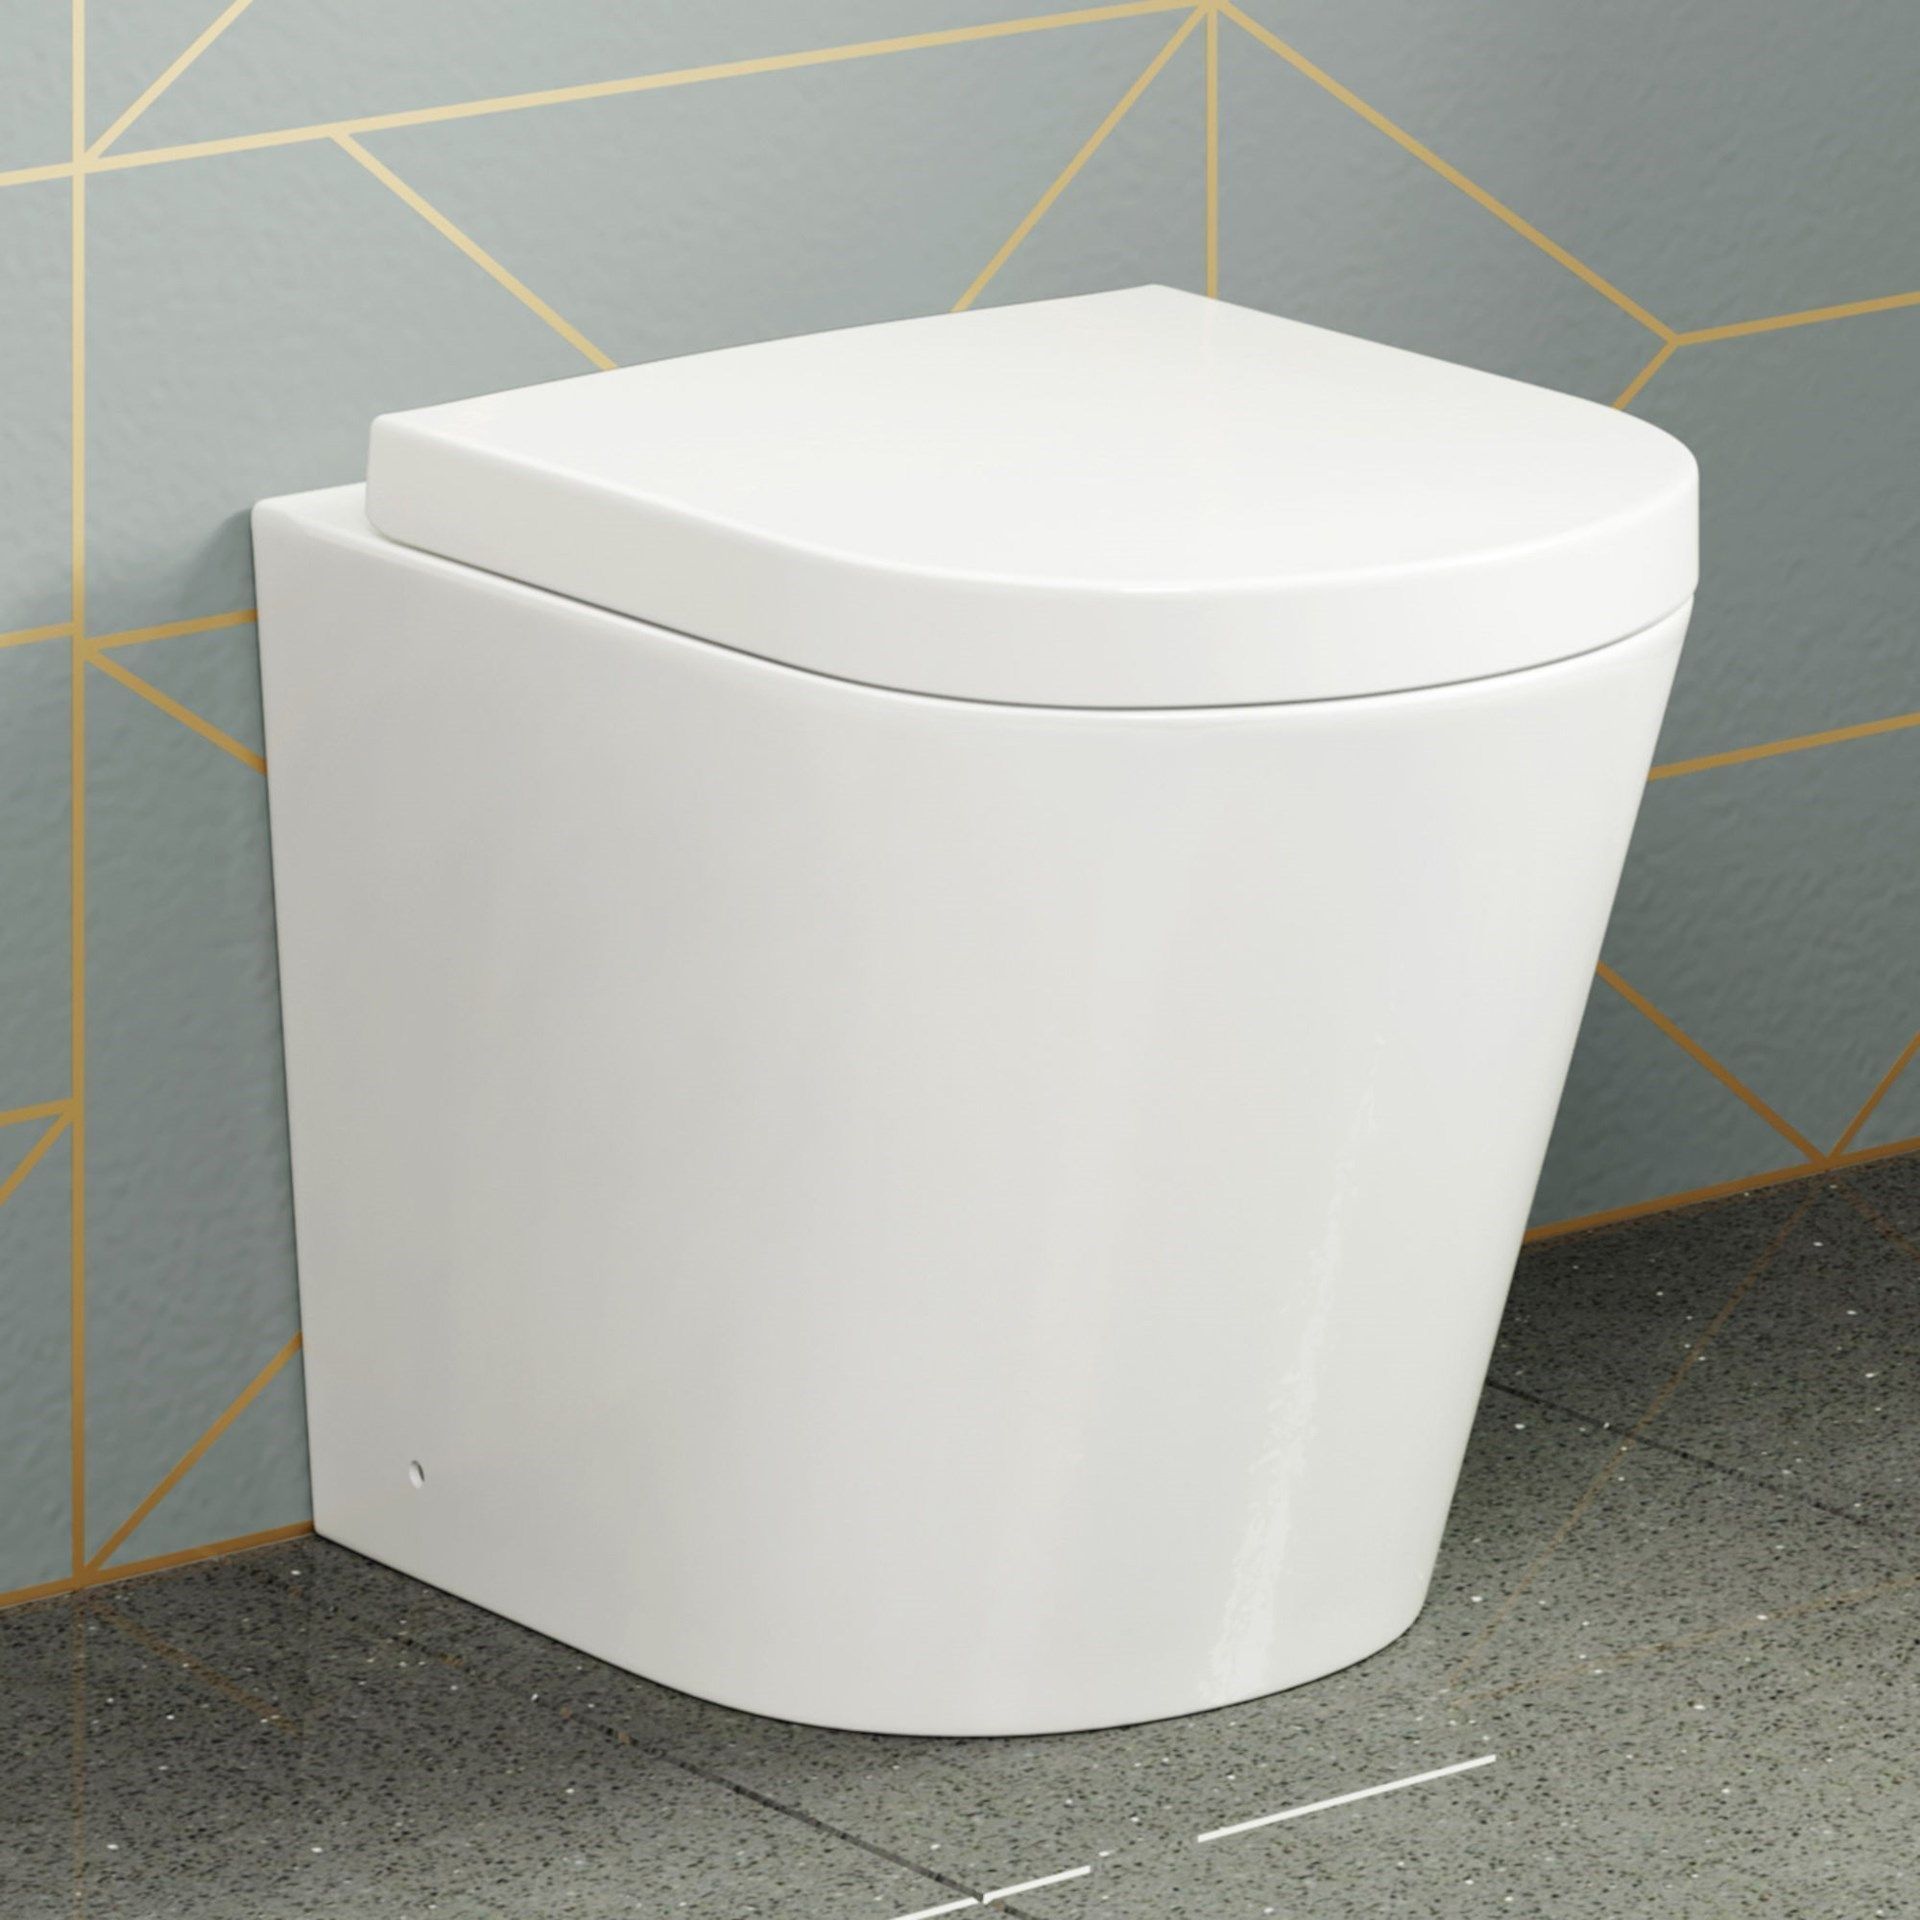 BRAND NEW BOXED Lyon Back To Wall Toilet with Soft Close Seat. RRP £349.99 each.